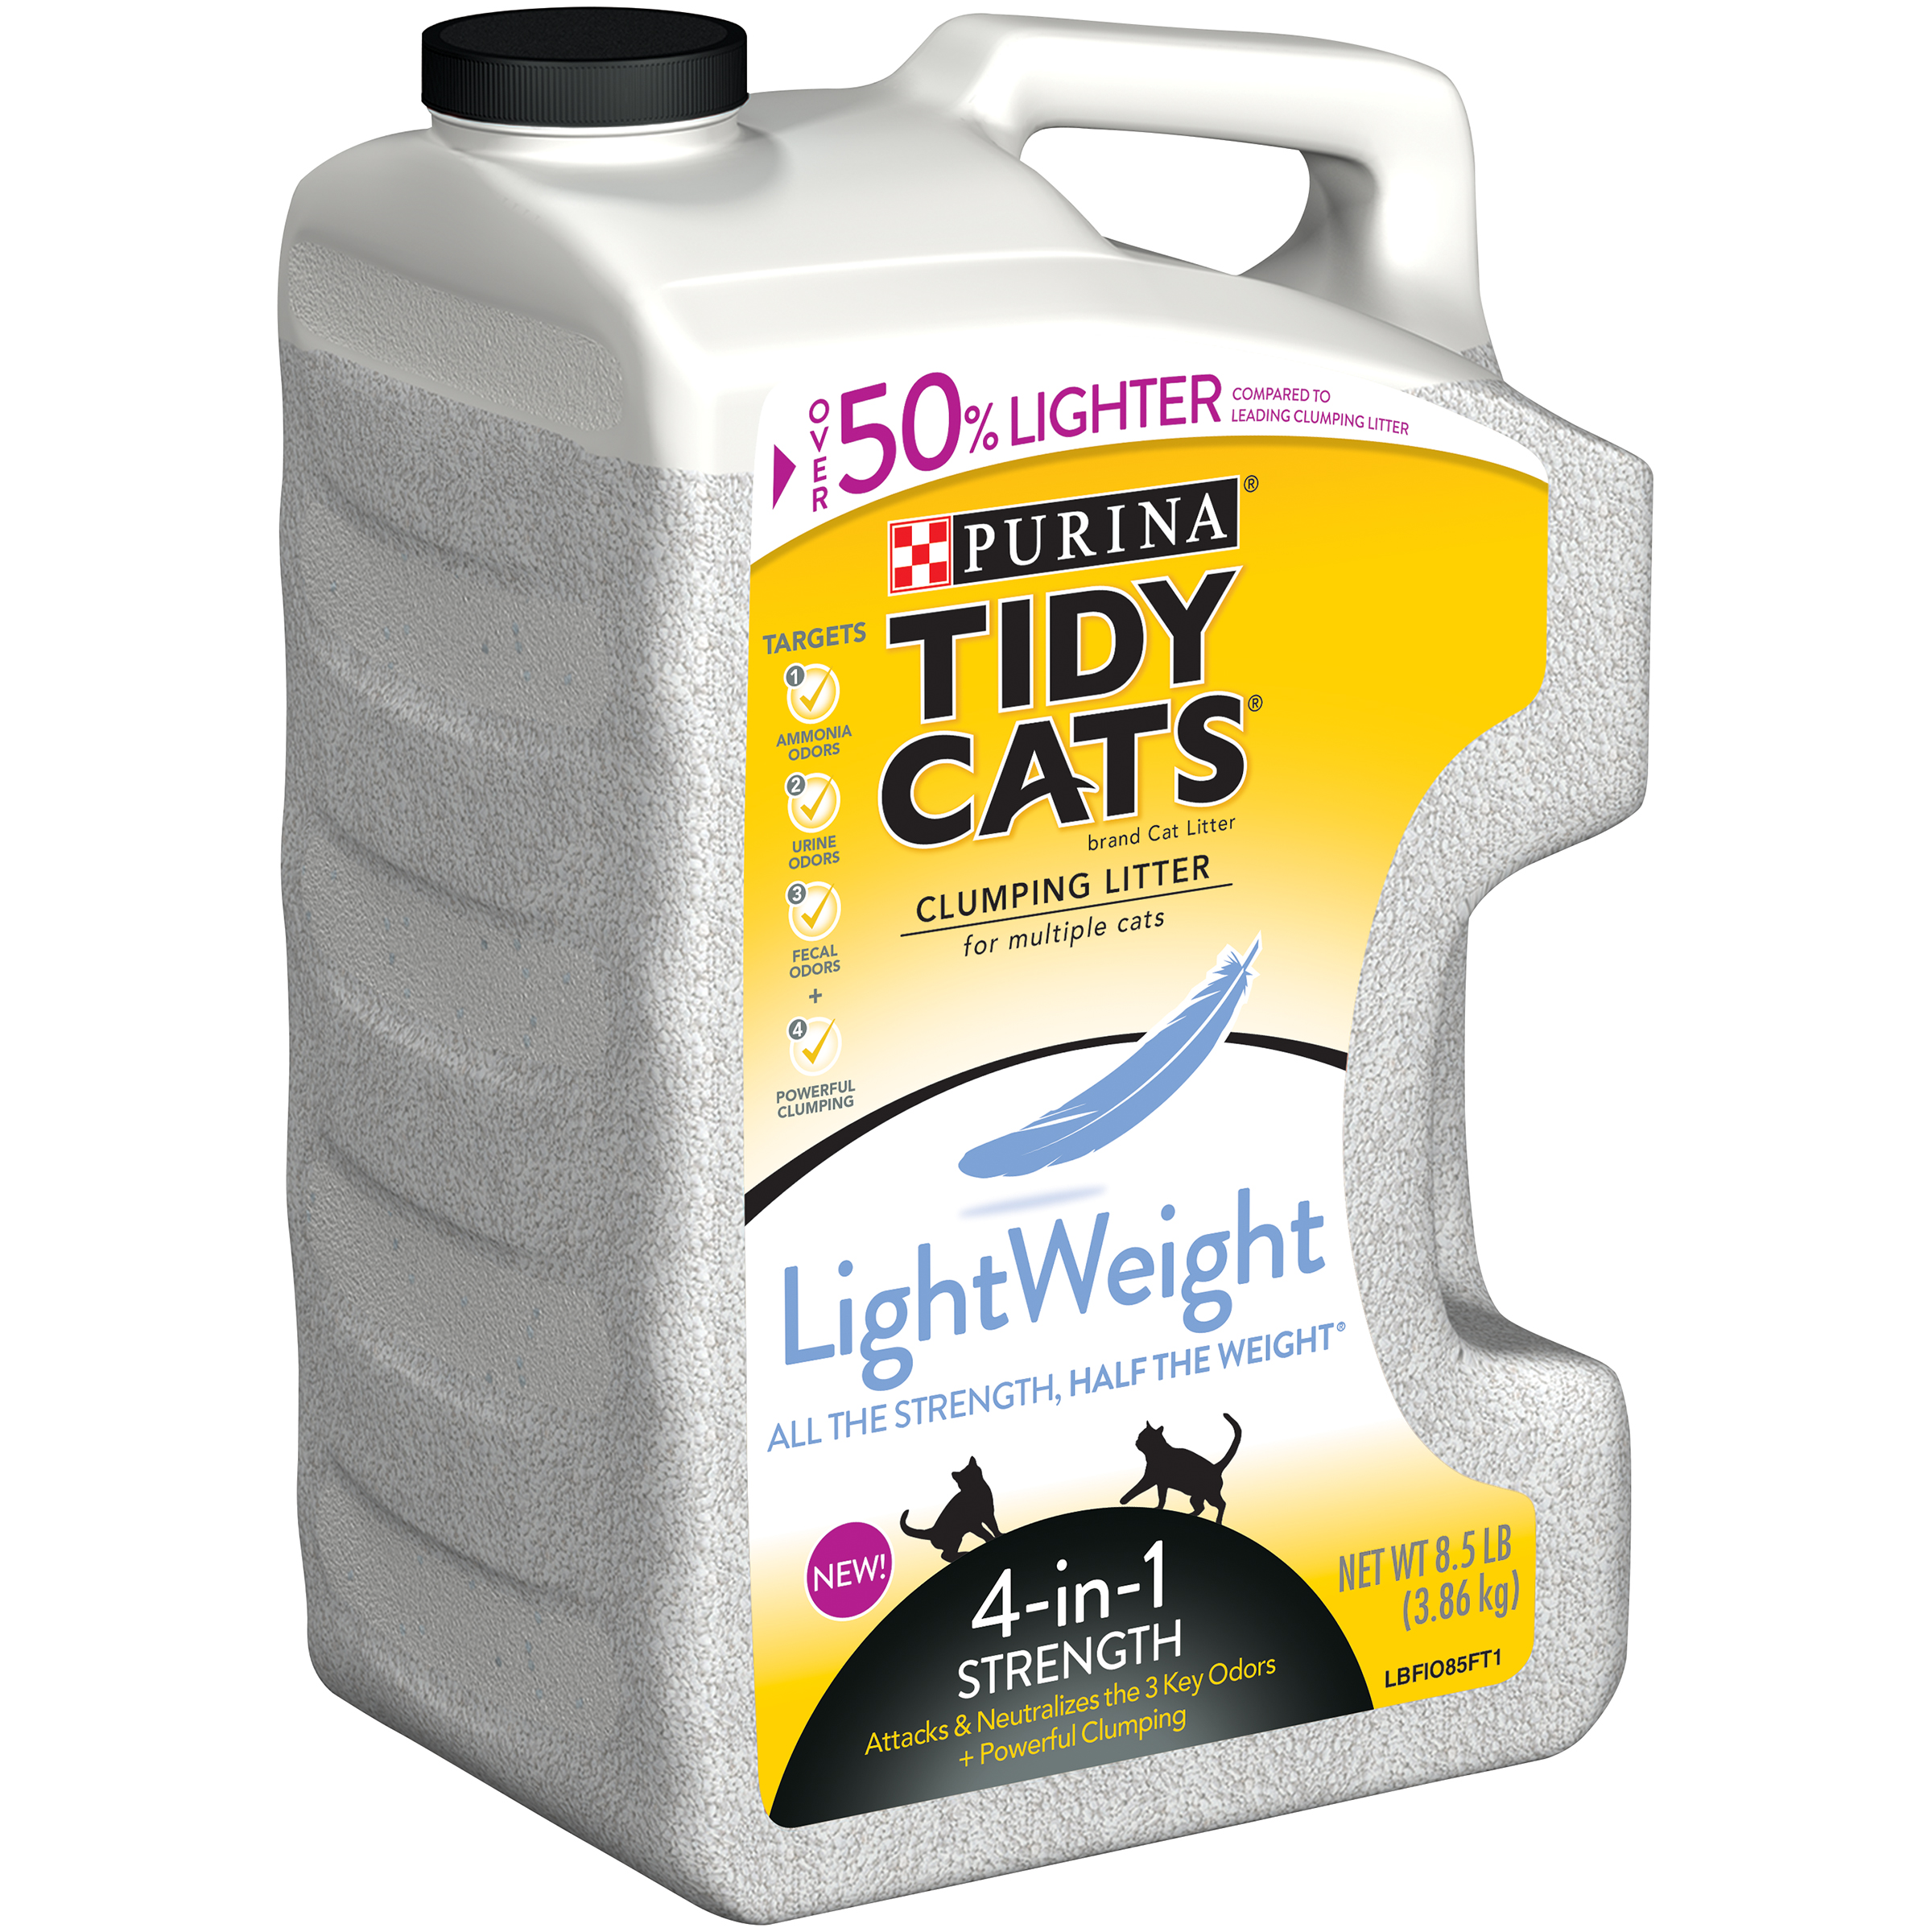 Tidy Cats Clumping Litter LightWeight 4in1 Strength for Multiple Cats